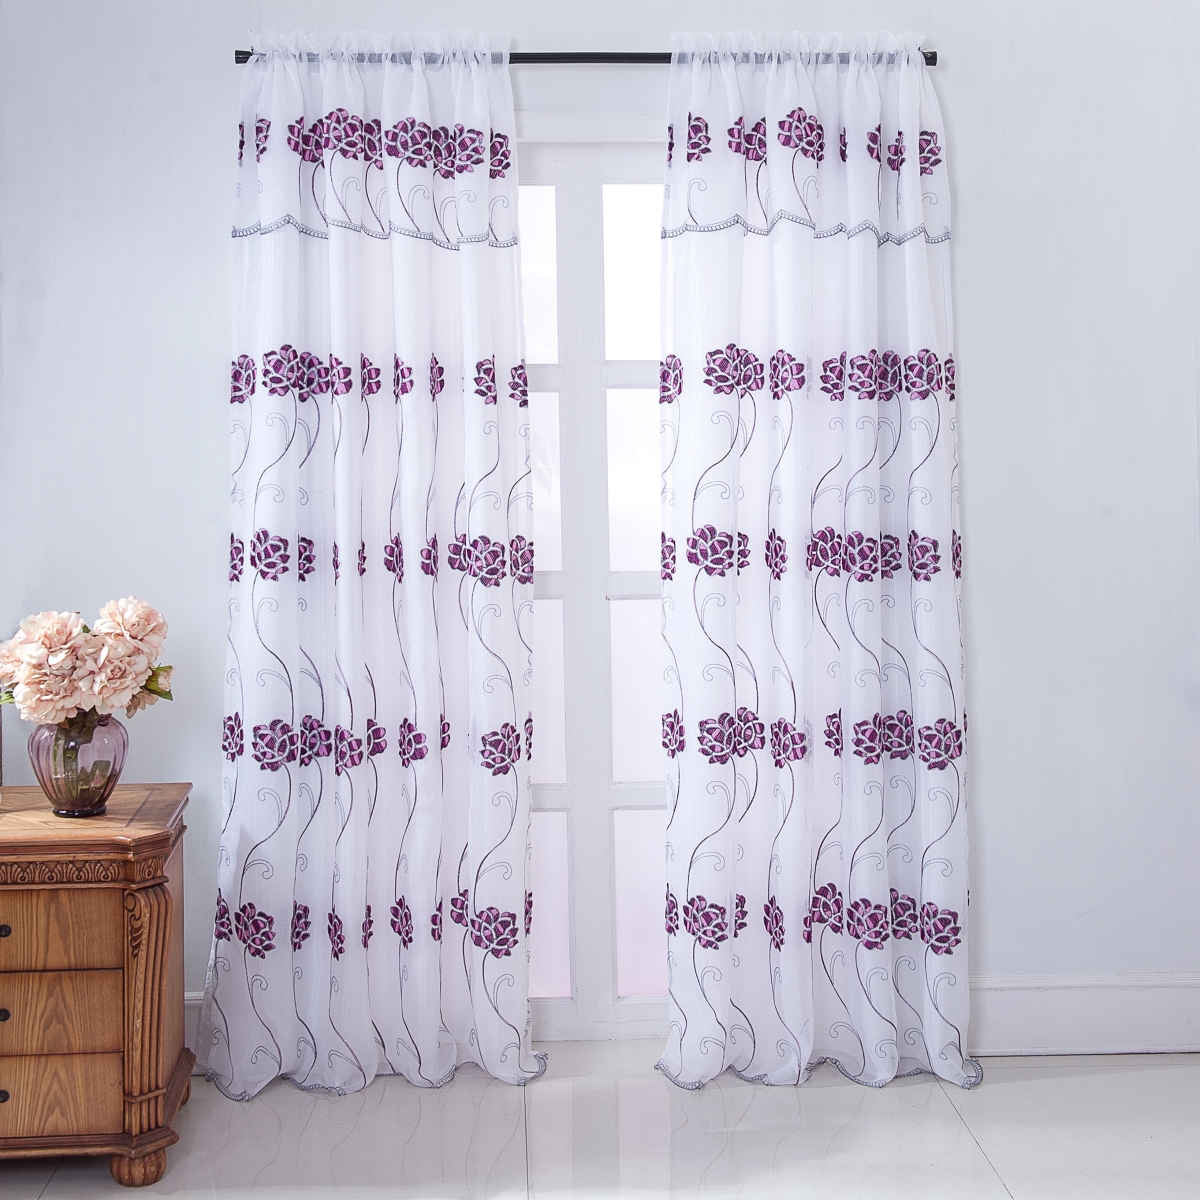 Pns19146 Sapphire Floral Embroidered Rod Pocket Single Curtain Panel In Lilac - 54 X 84 In.